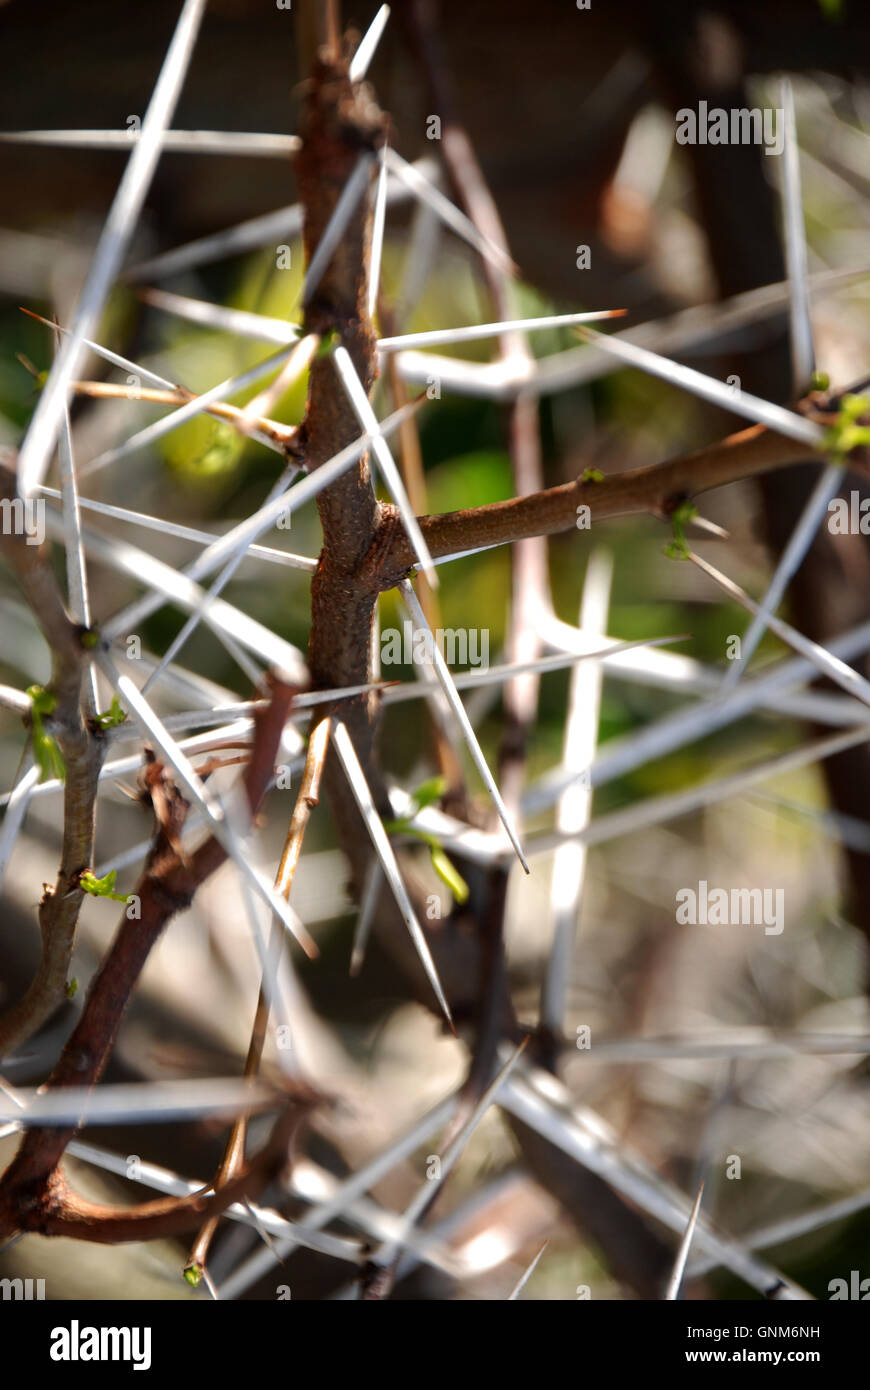 Very long sharp spikes or dangerous thorns Stock Photo